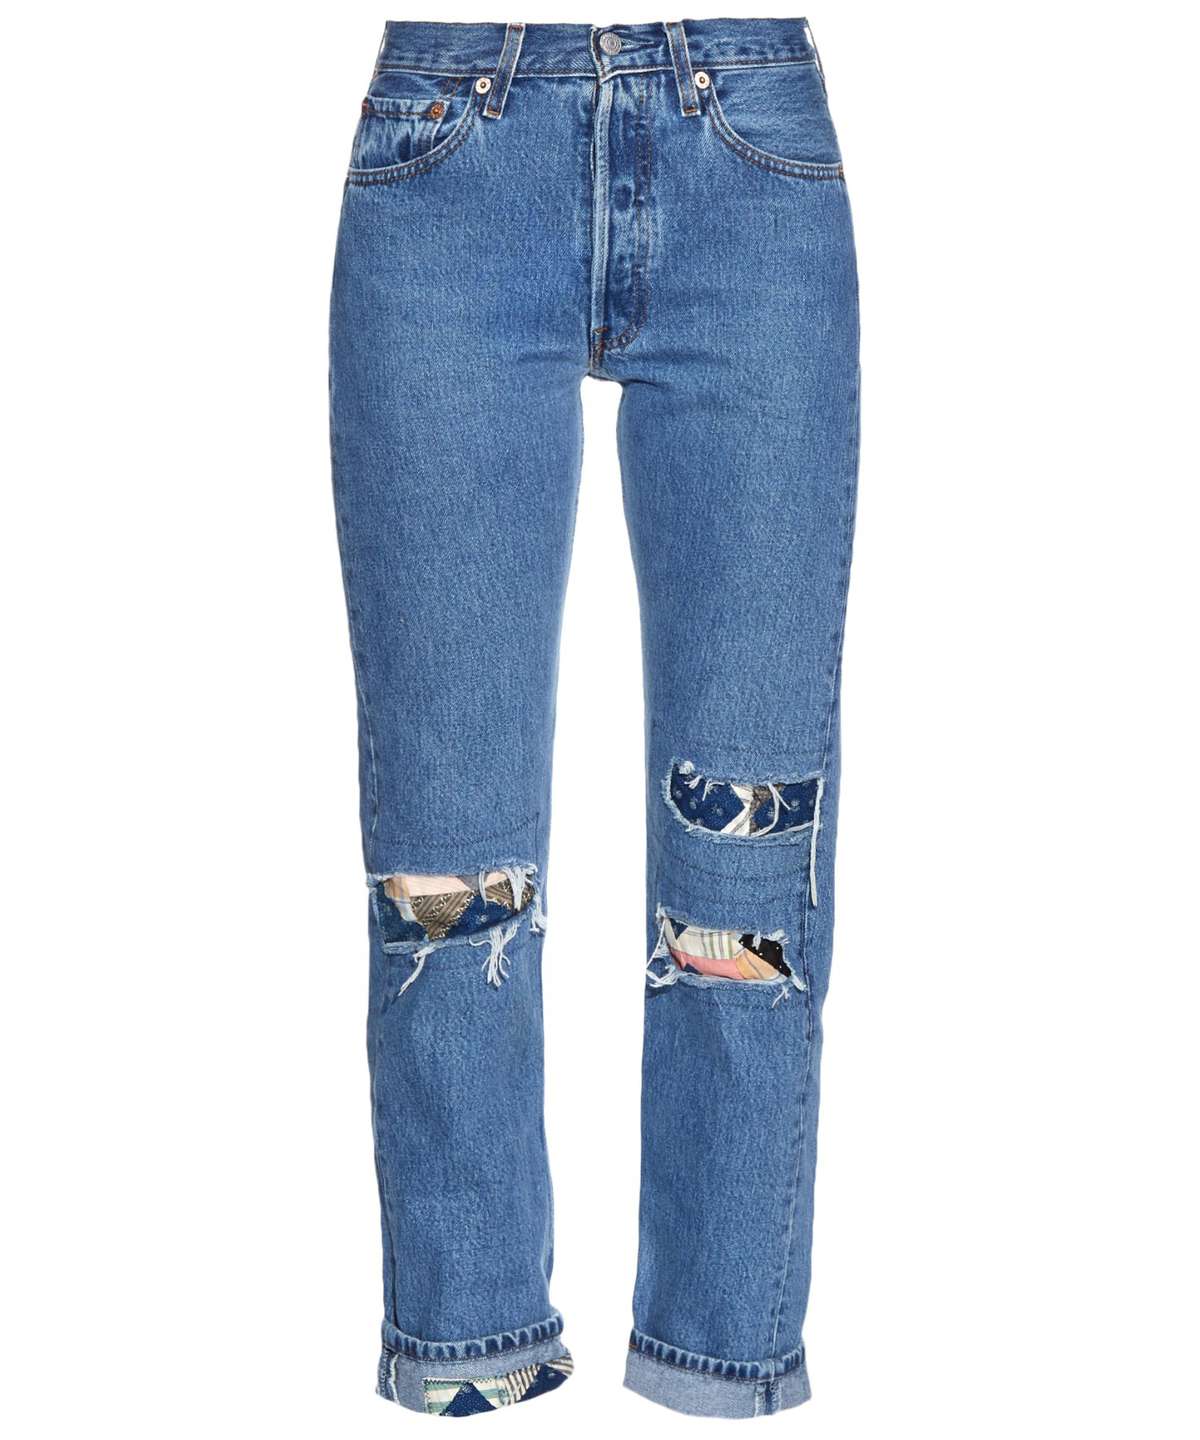 Bliss and Mischief Patchwork Jeans